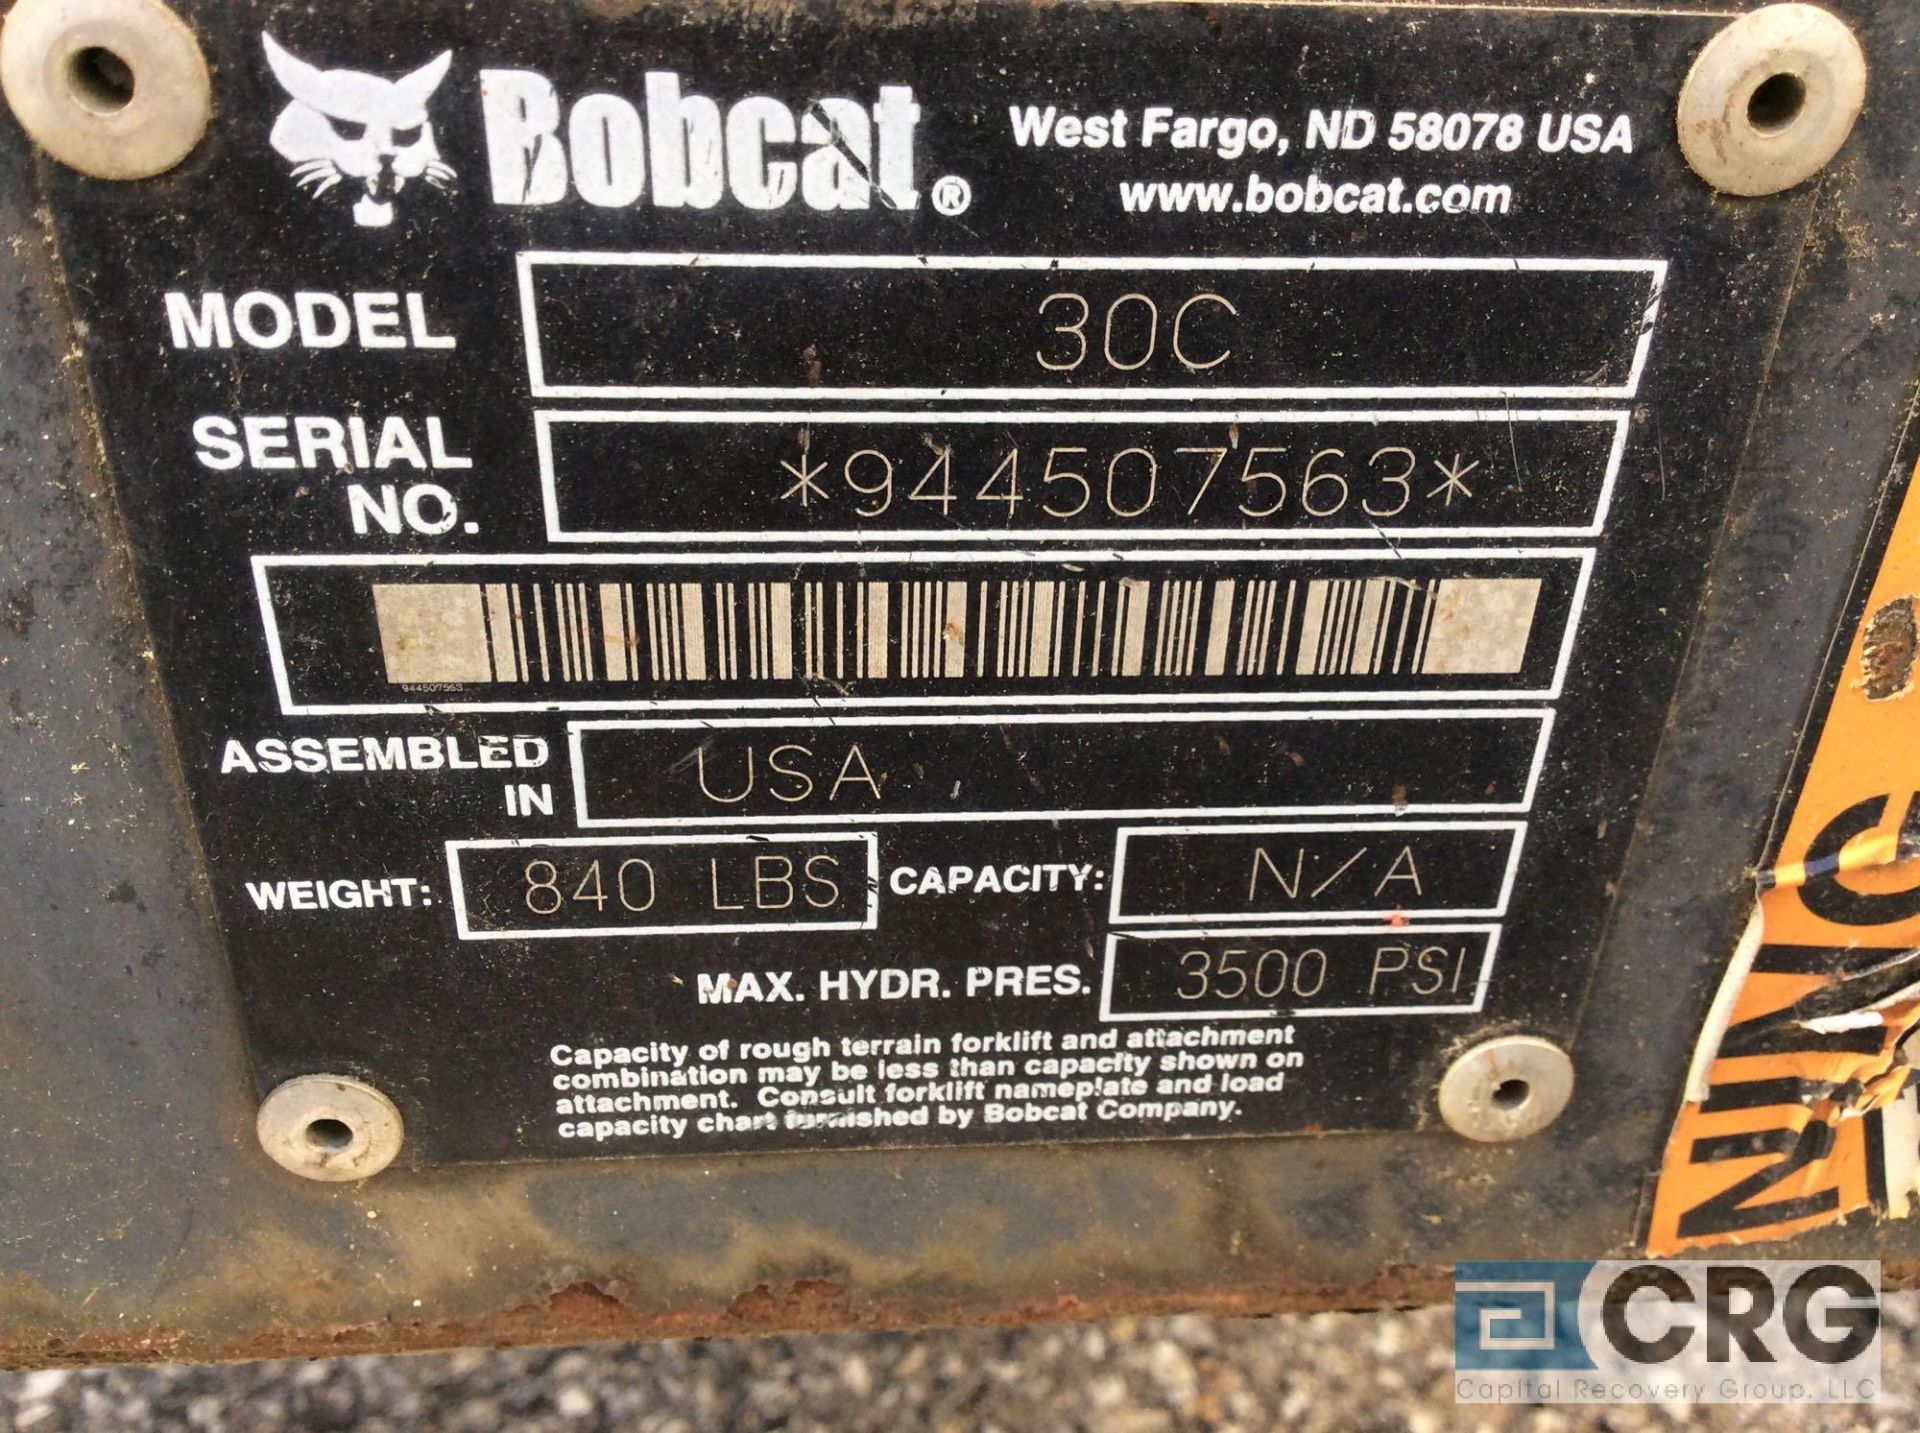 Bobcat 30C auger attachment with 12 inch and 30 inch auger bits - Image 2 of 4